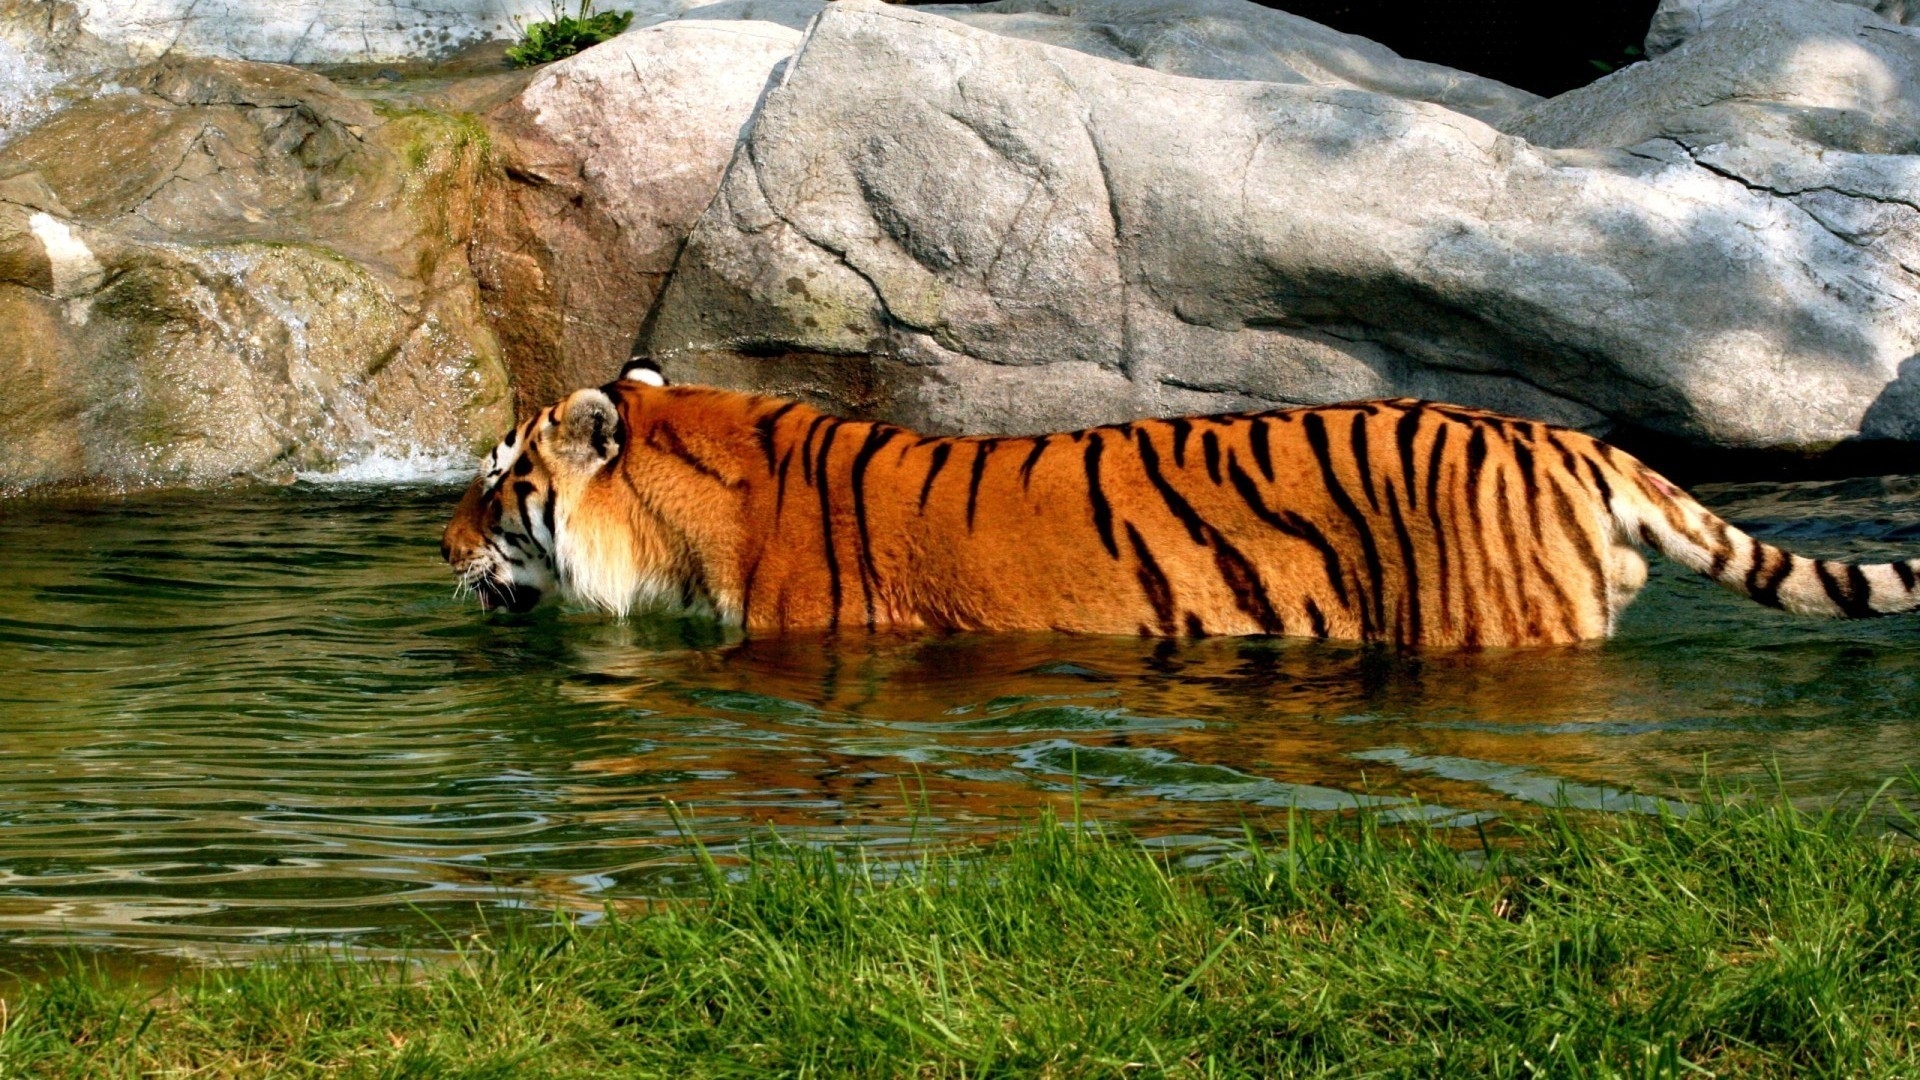 Tiger in Water for 1920 x 1080 HDTV 1080p resolution